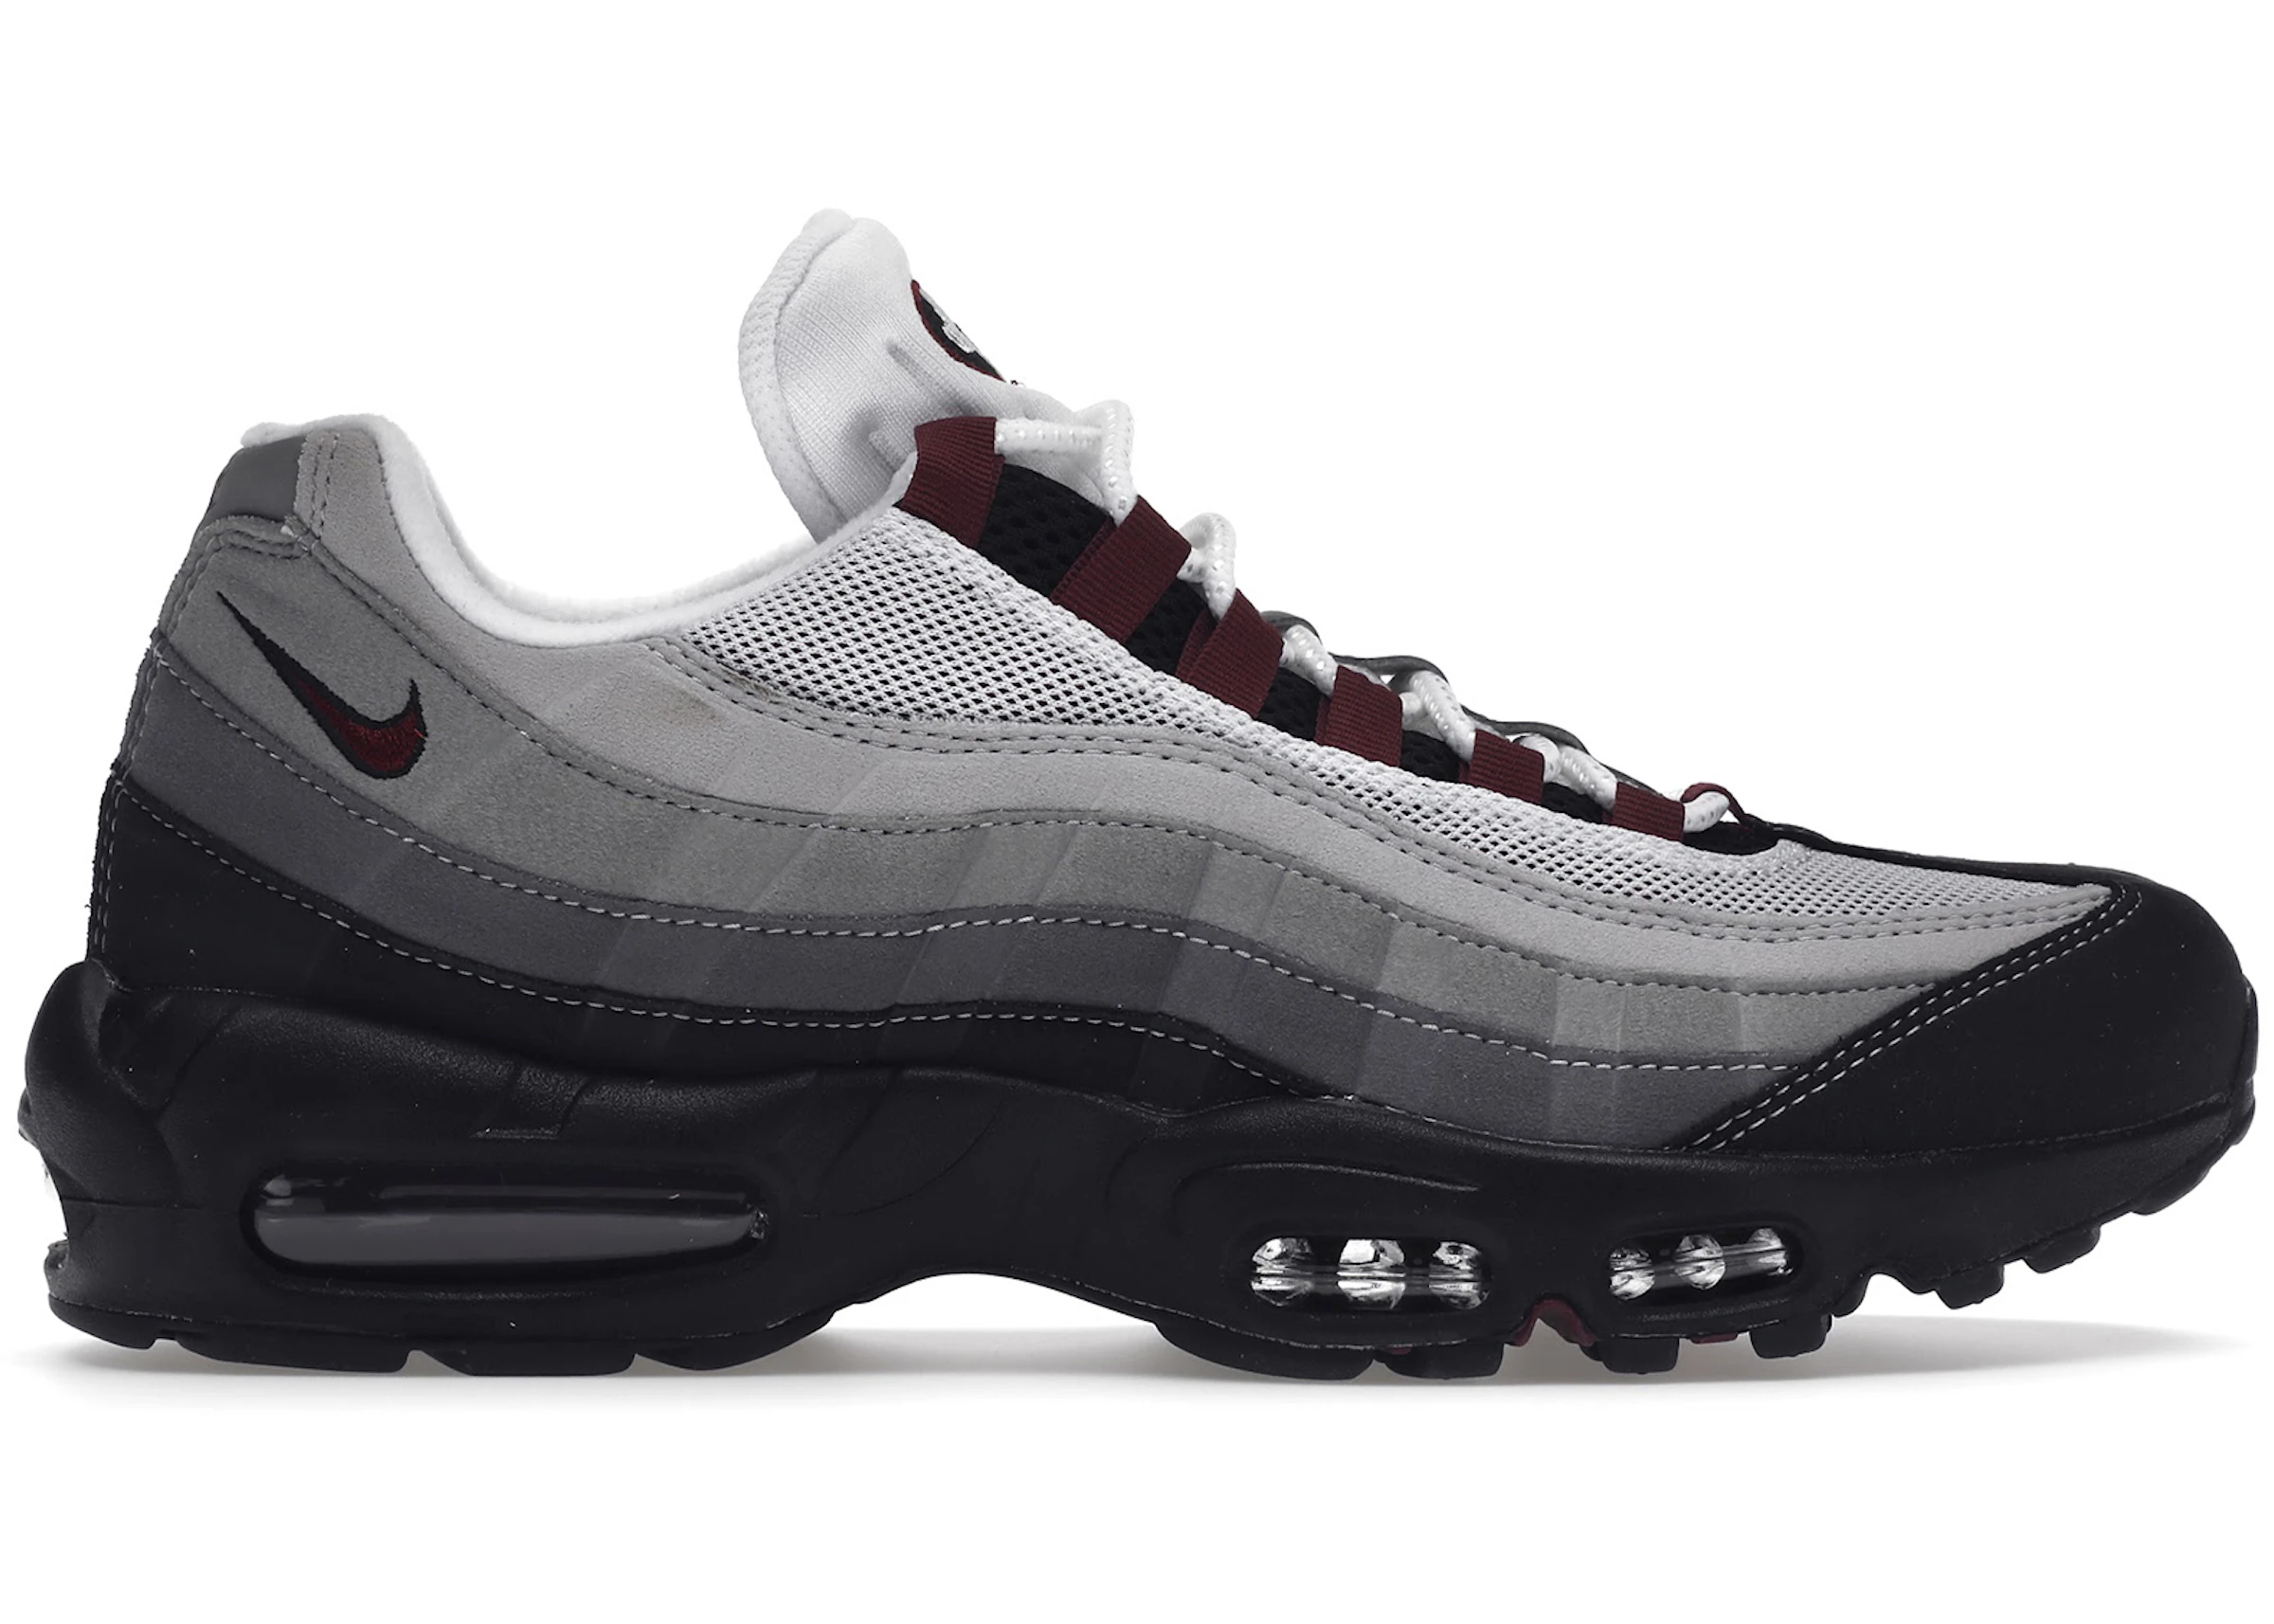 Omhoog expositie storm Buy Nike Air Max 95 Shoes & New Sneakers - StockX